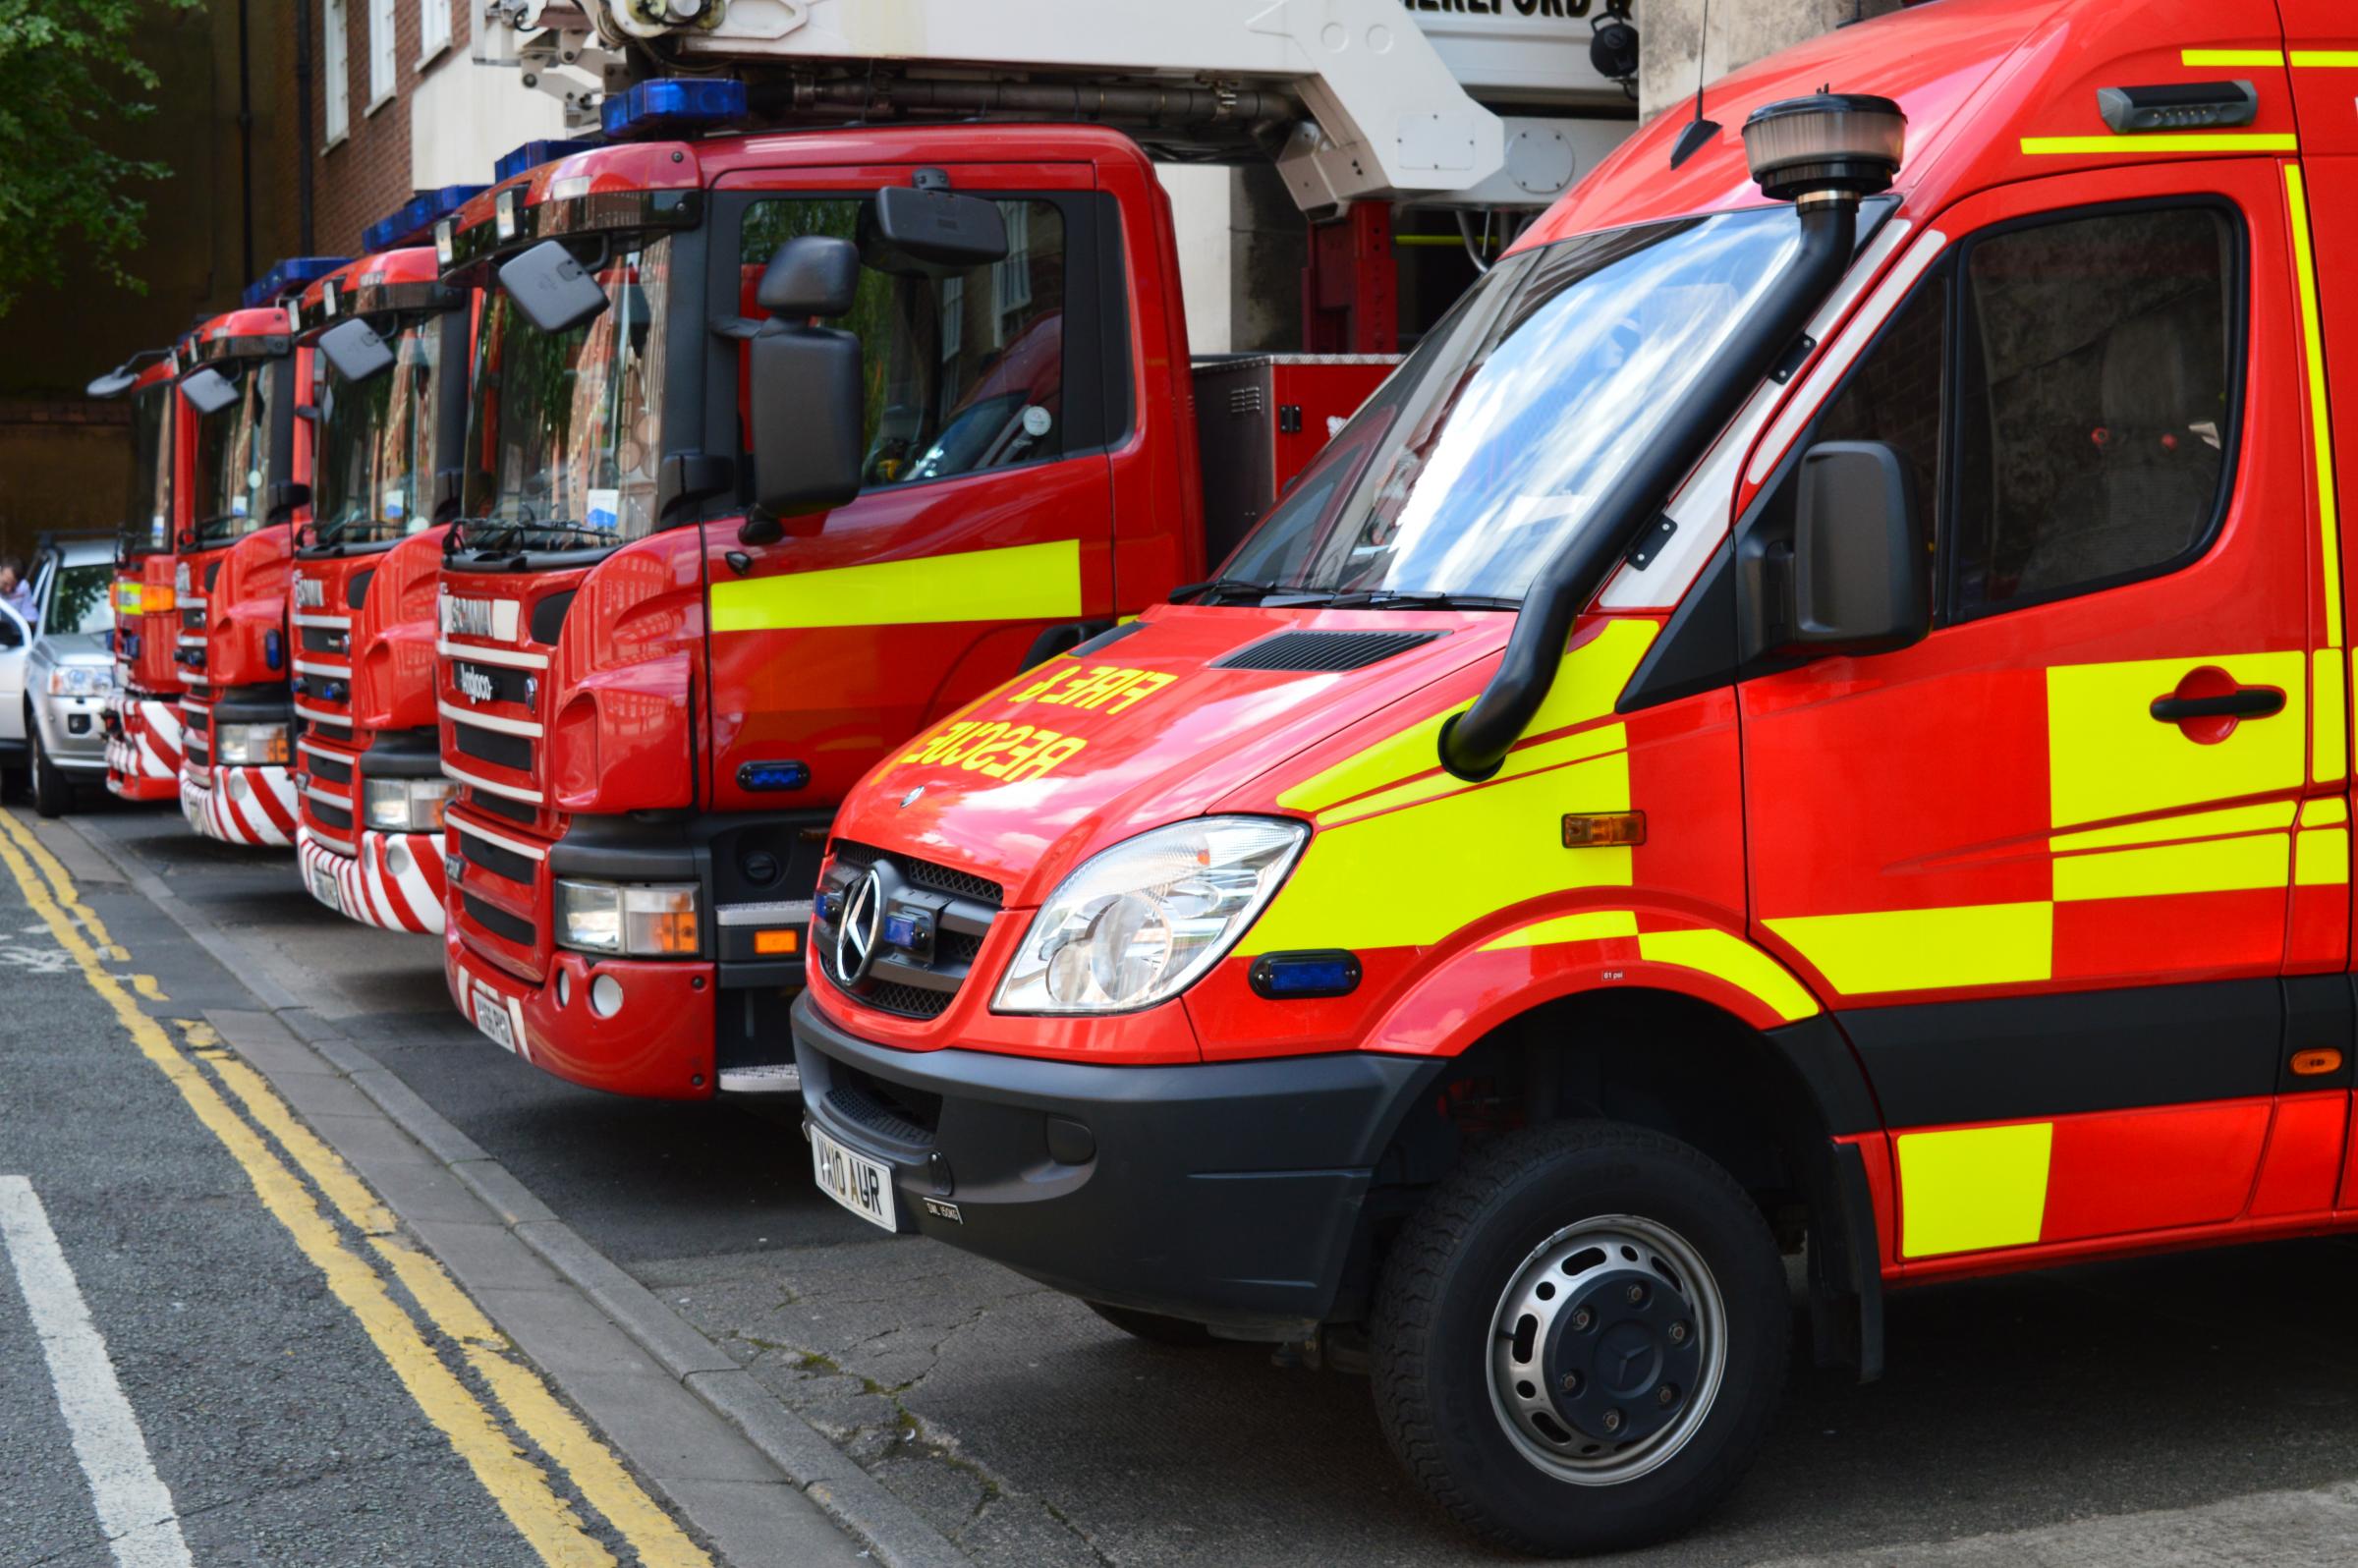 Oven removed from Hereford home following fire